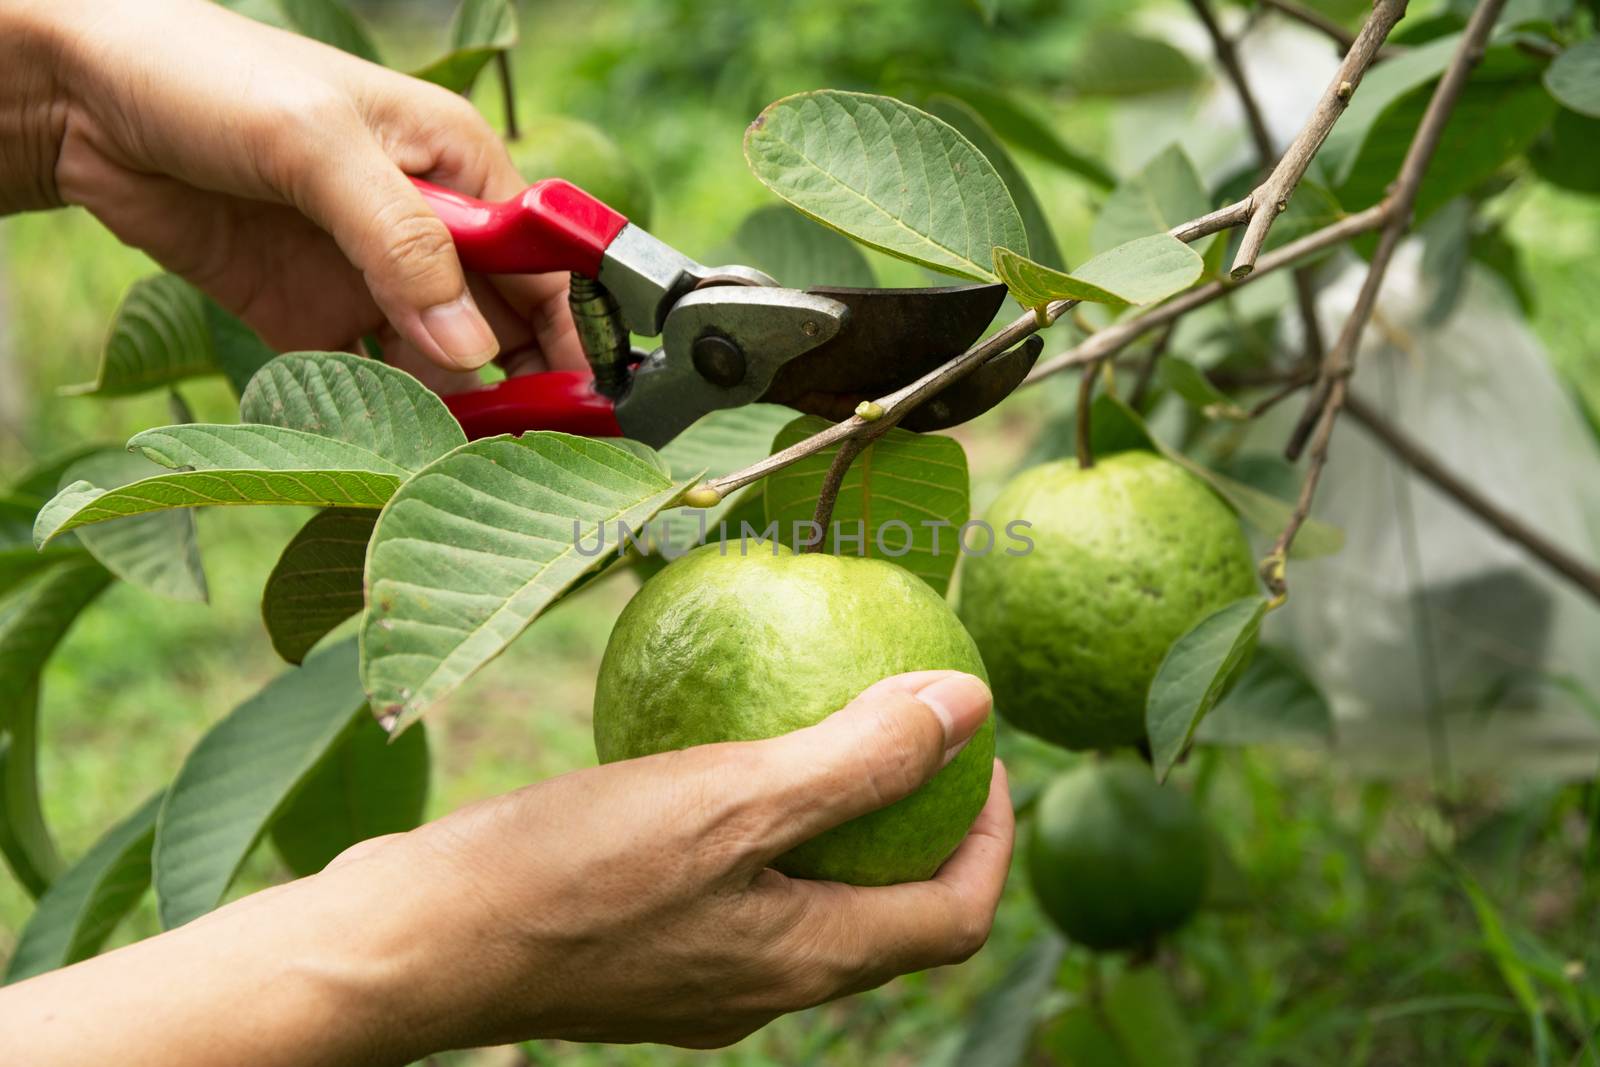 gardener pruning guava trees with pruning shears on nature backg by kirisa99